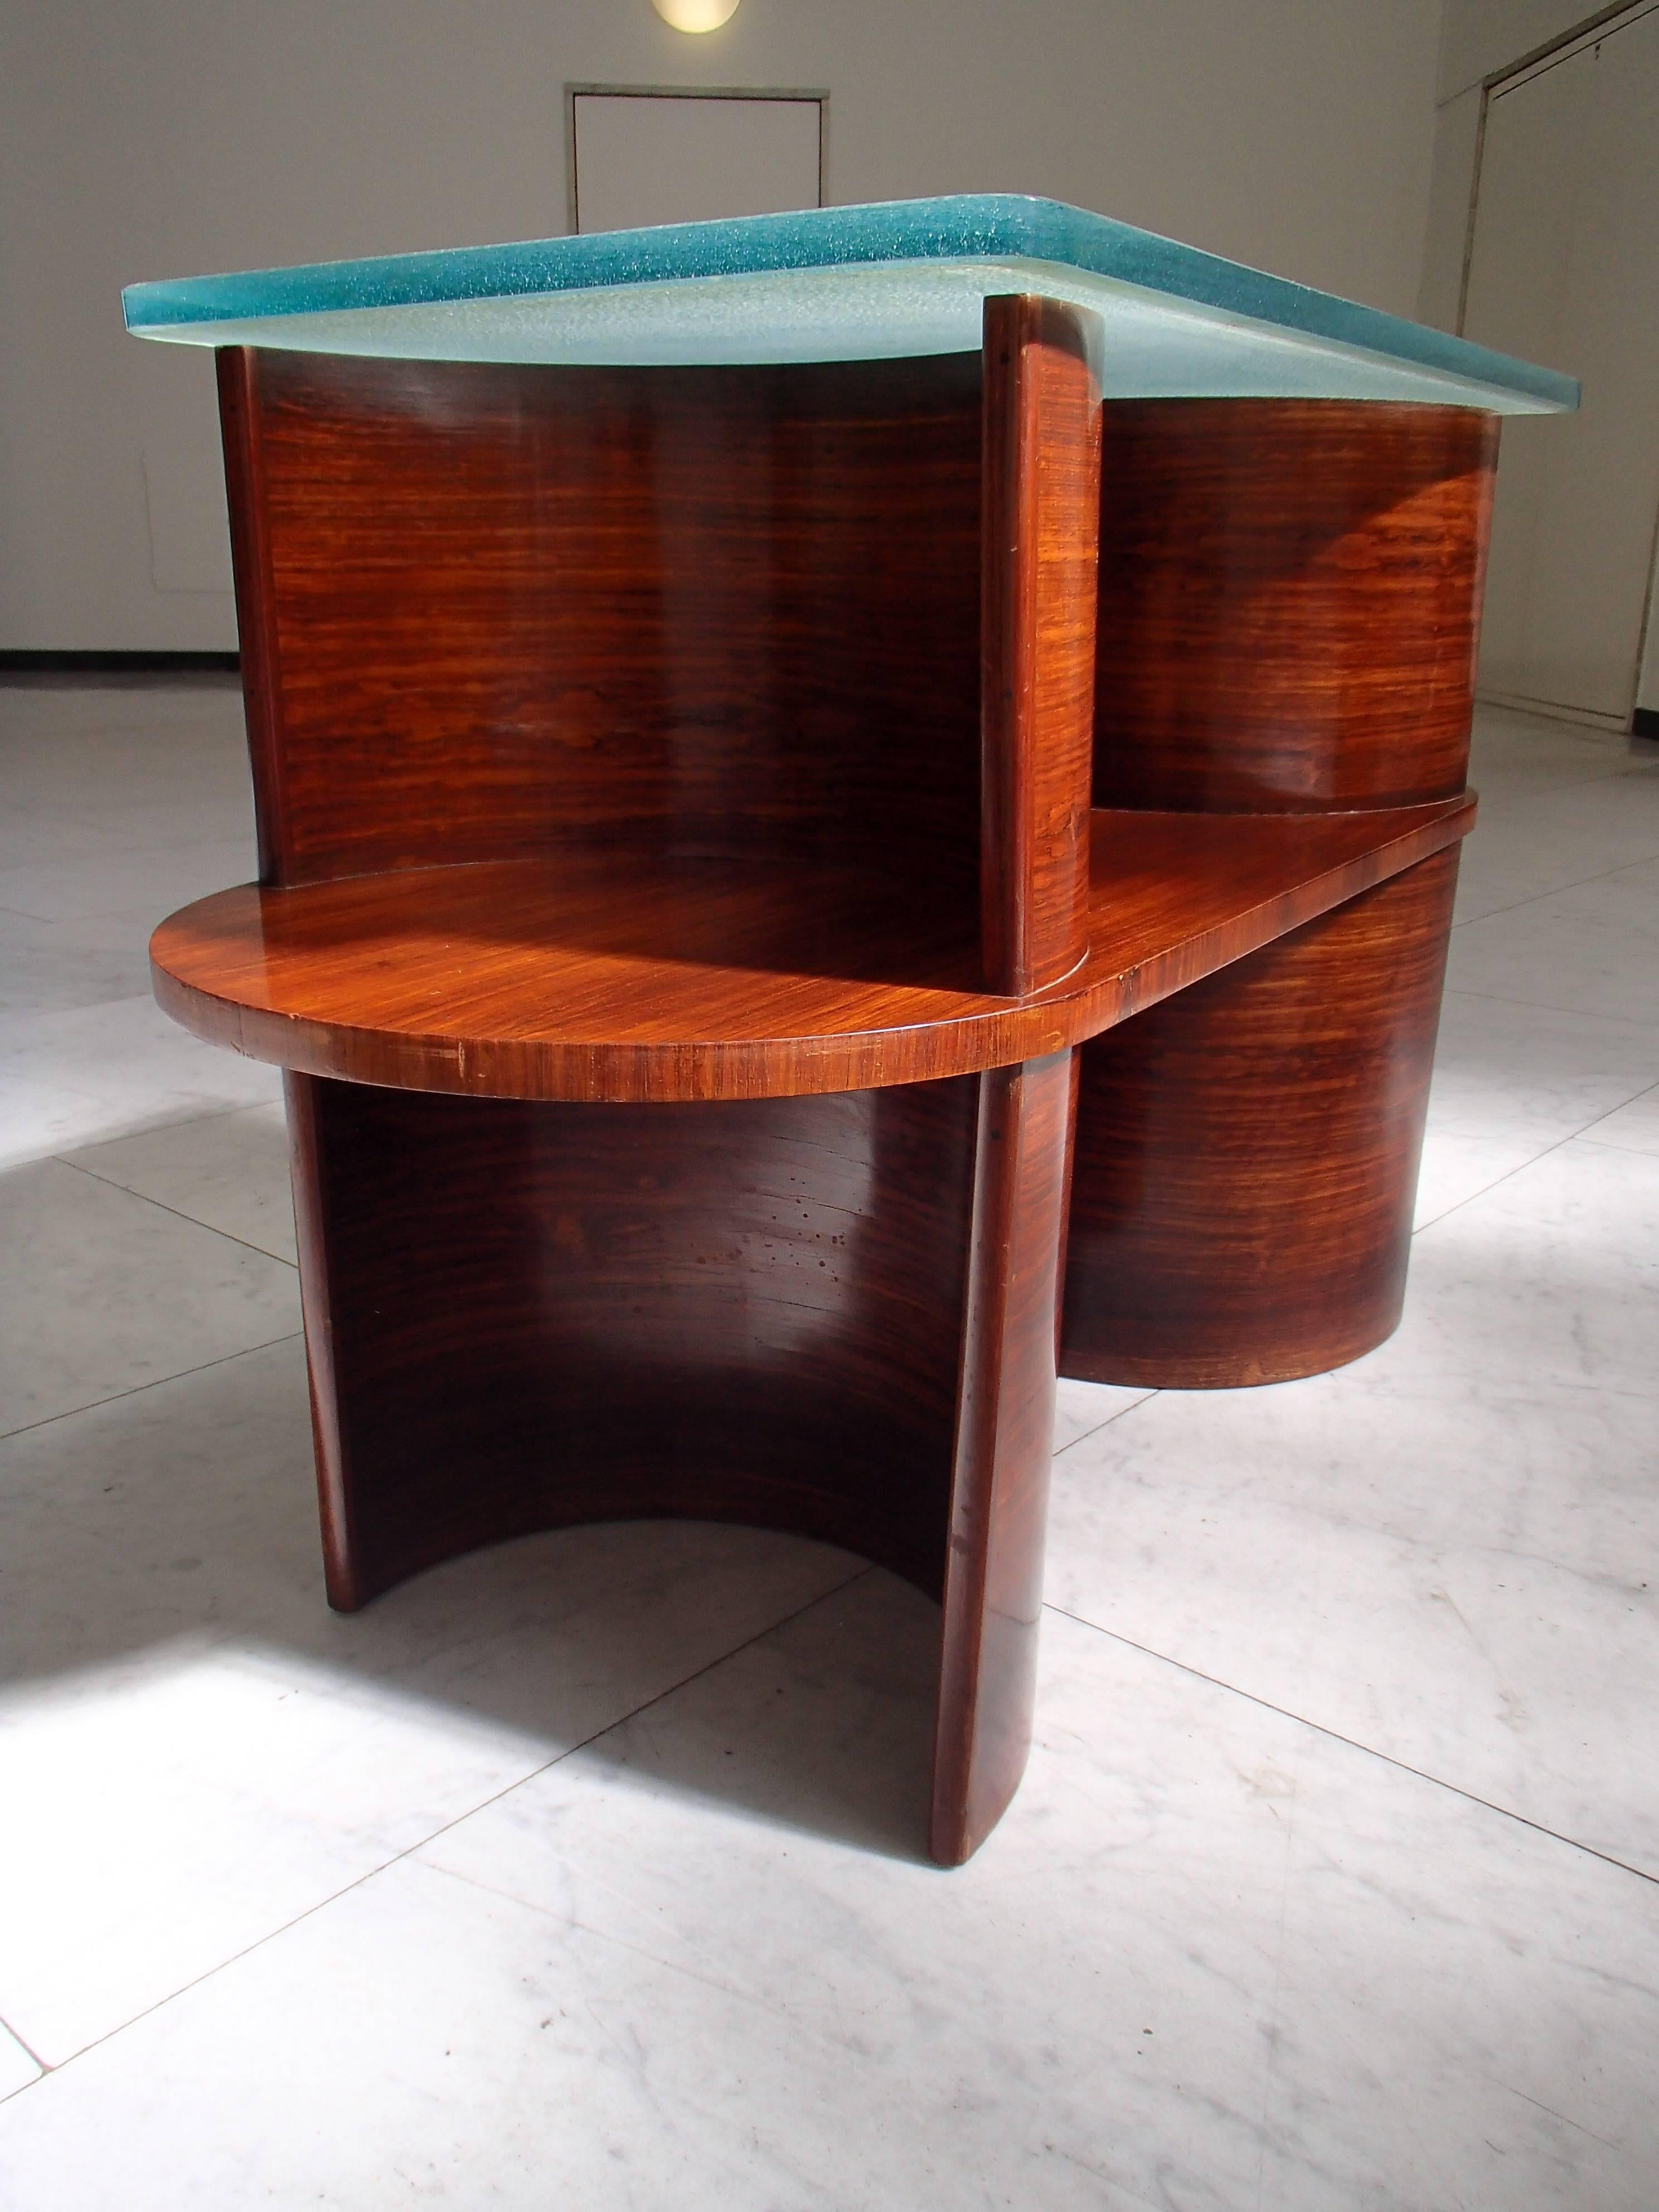 Art Deco 1930 Cubist Modernistic Console Table Rosewood and Thick Glass Top For Sale